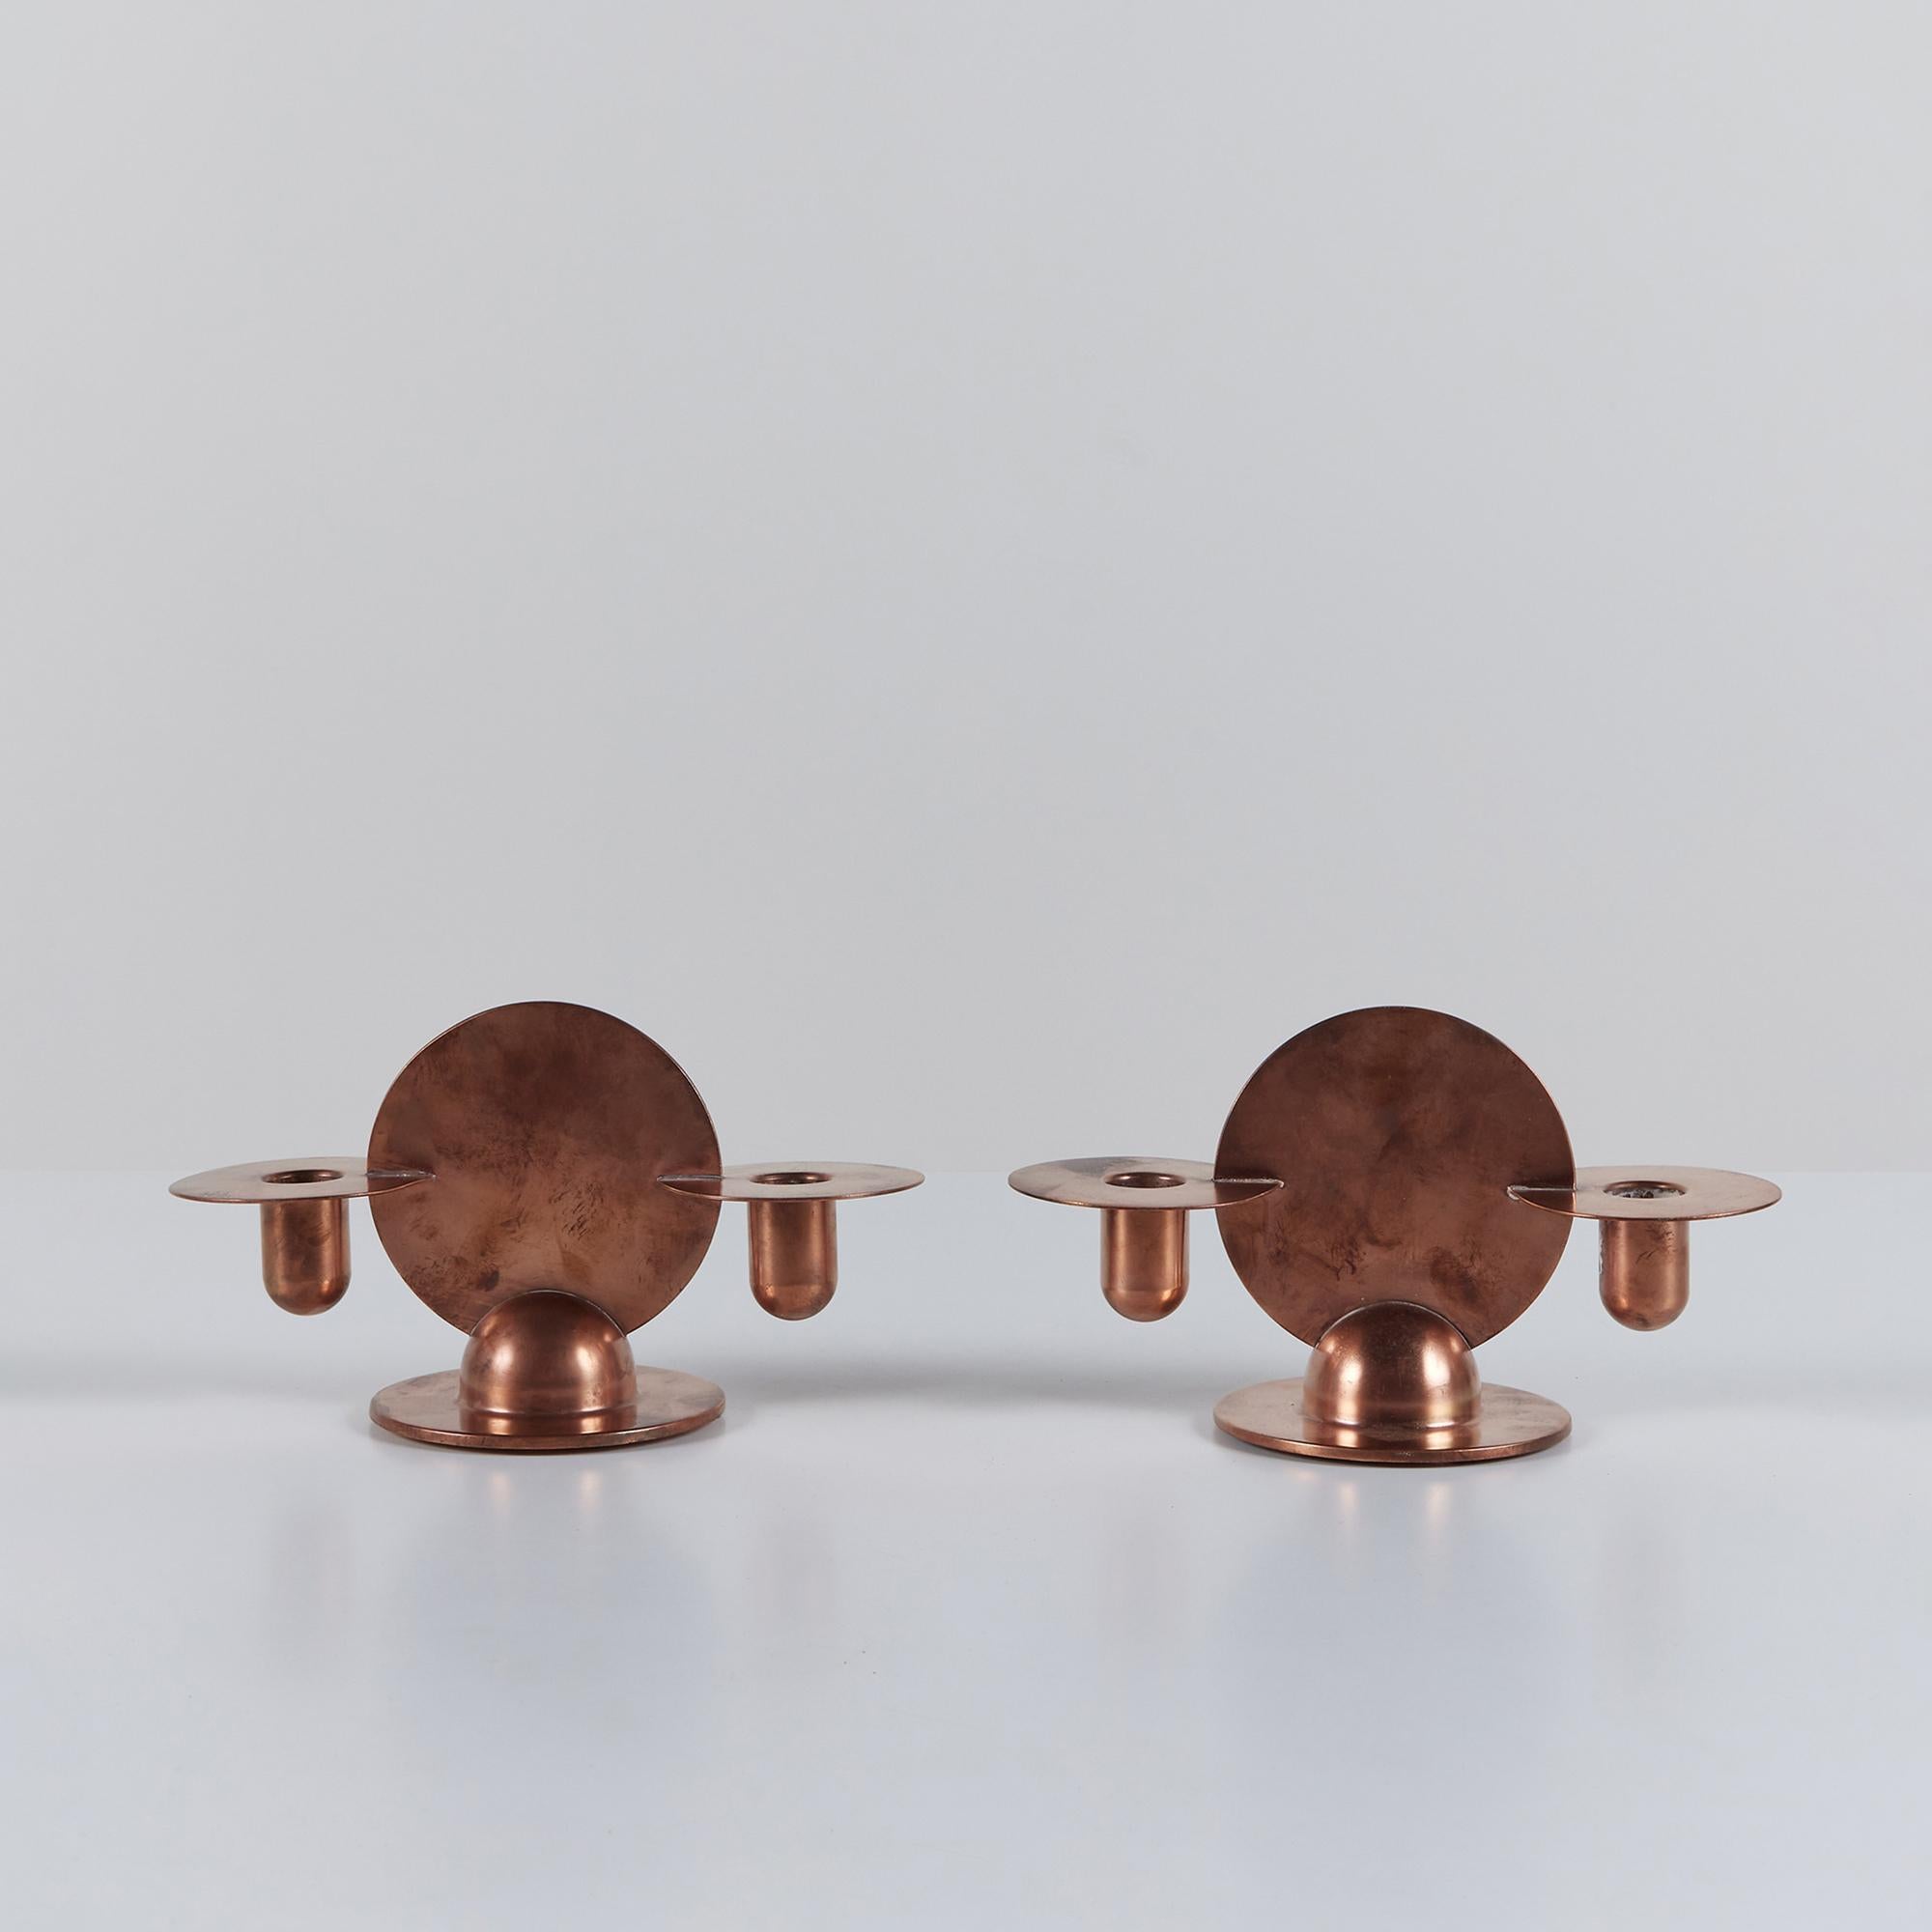 Pair of solid copper candle holders by Walter von Nessen for Chase, c.1930s, USA. The pair of Art Deco candle sticks feature geometric circles and spheres. The minimalist design has one centric circle and two circular floating candle stick holders.